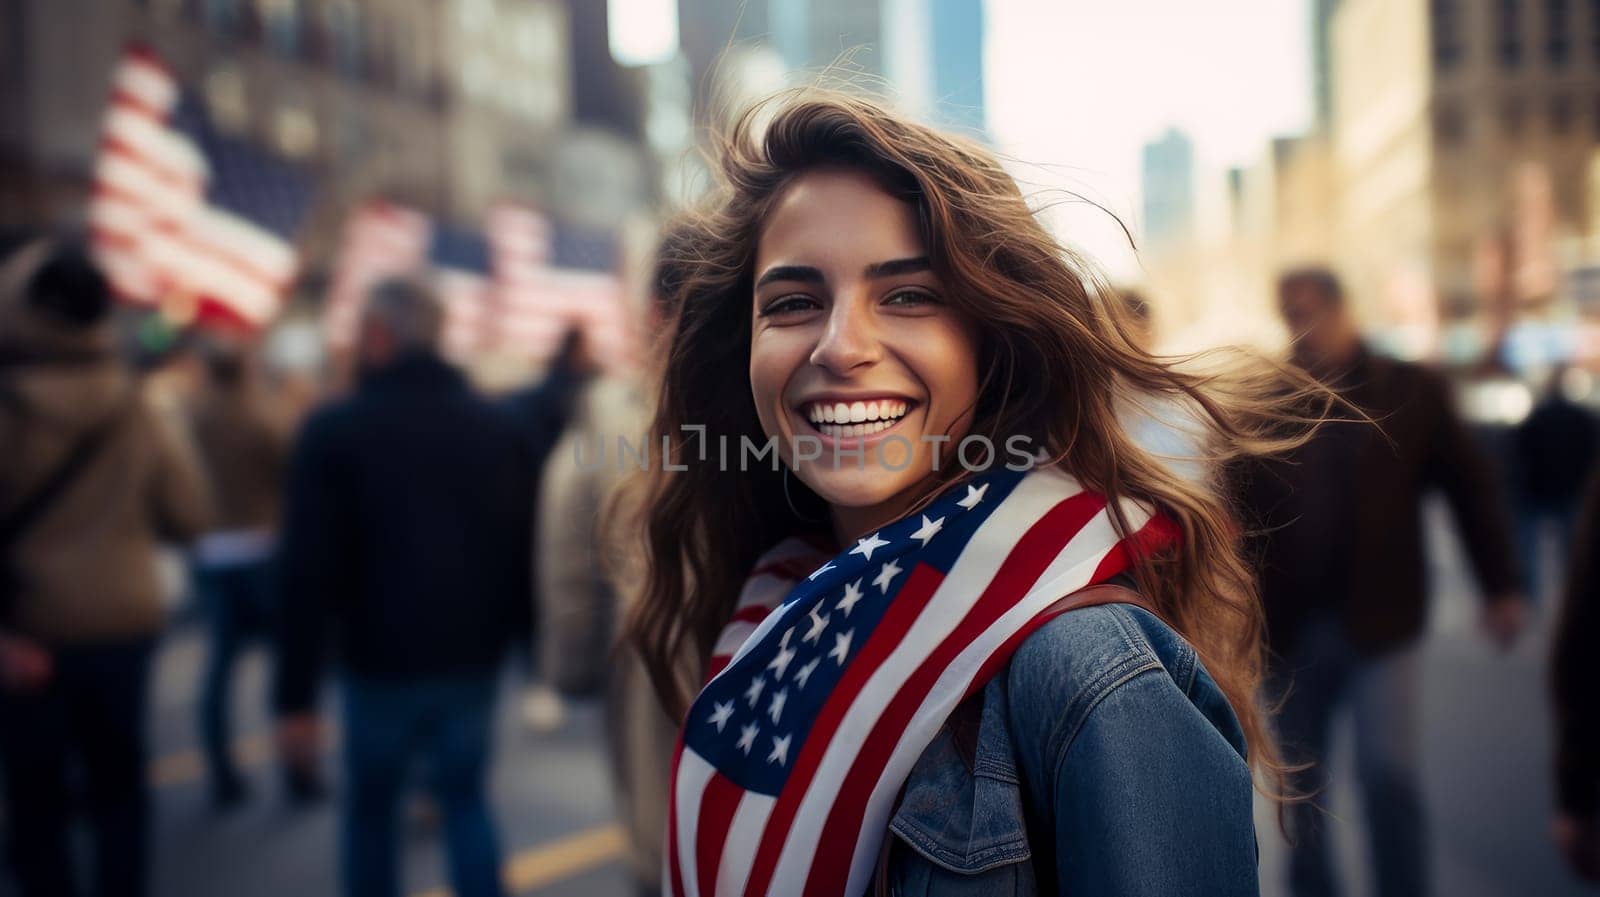 Happy, smiling woman with an American flag in the city on the Independence Day holidays of the United States of America. by Alla_Yurtayeva